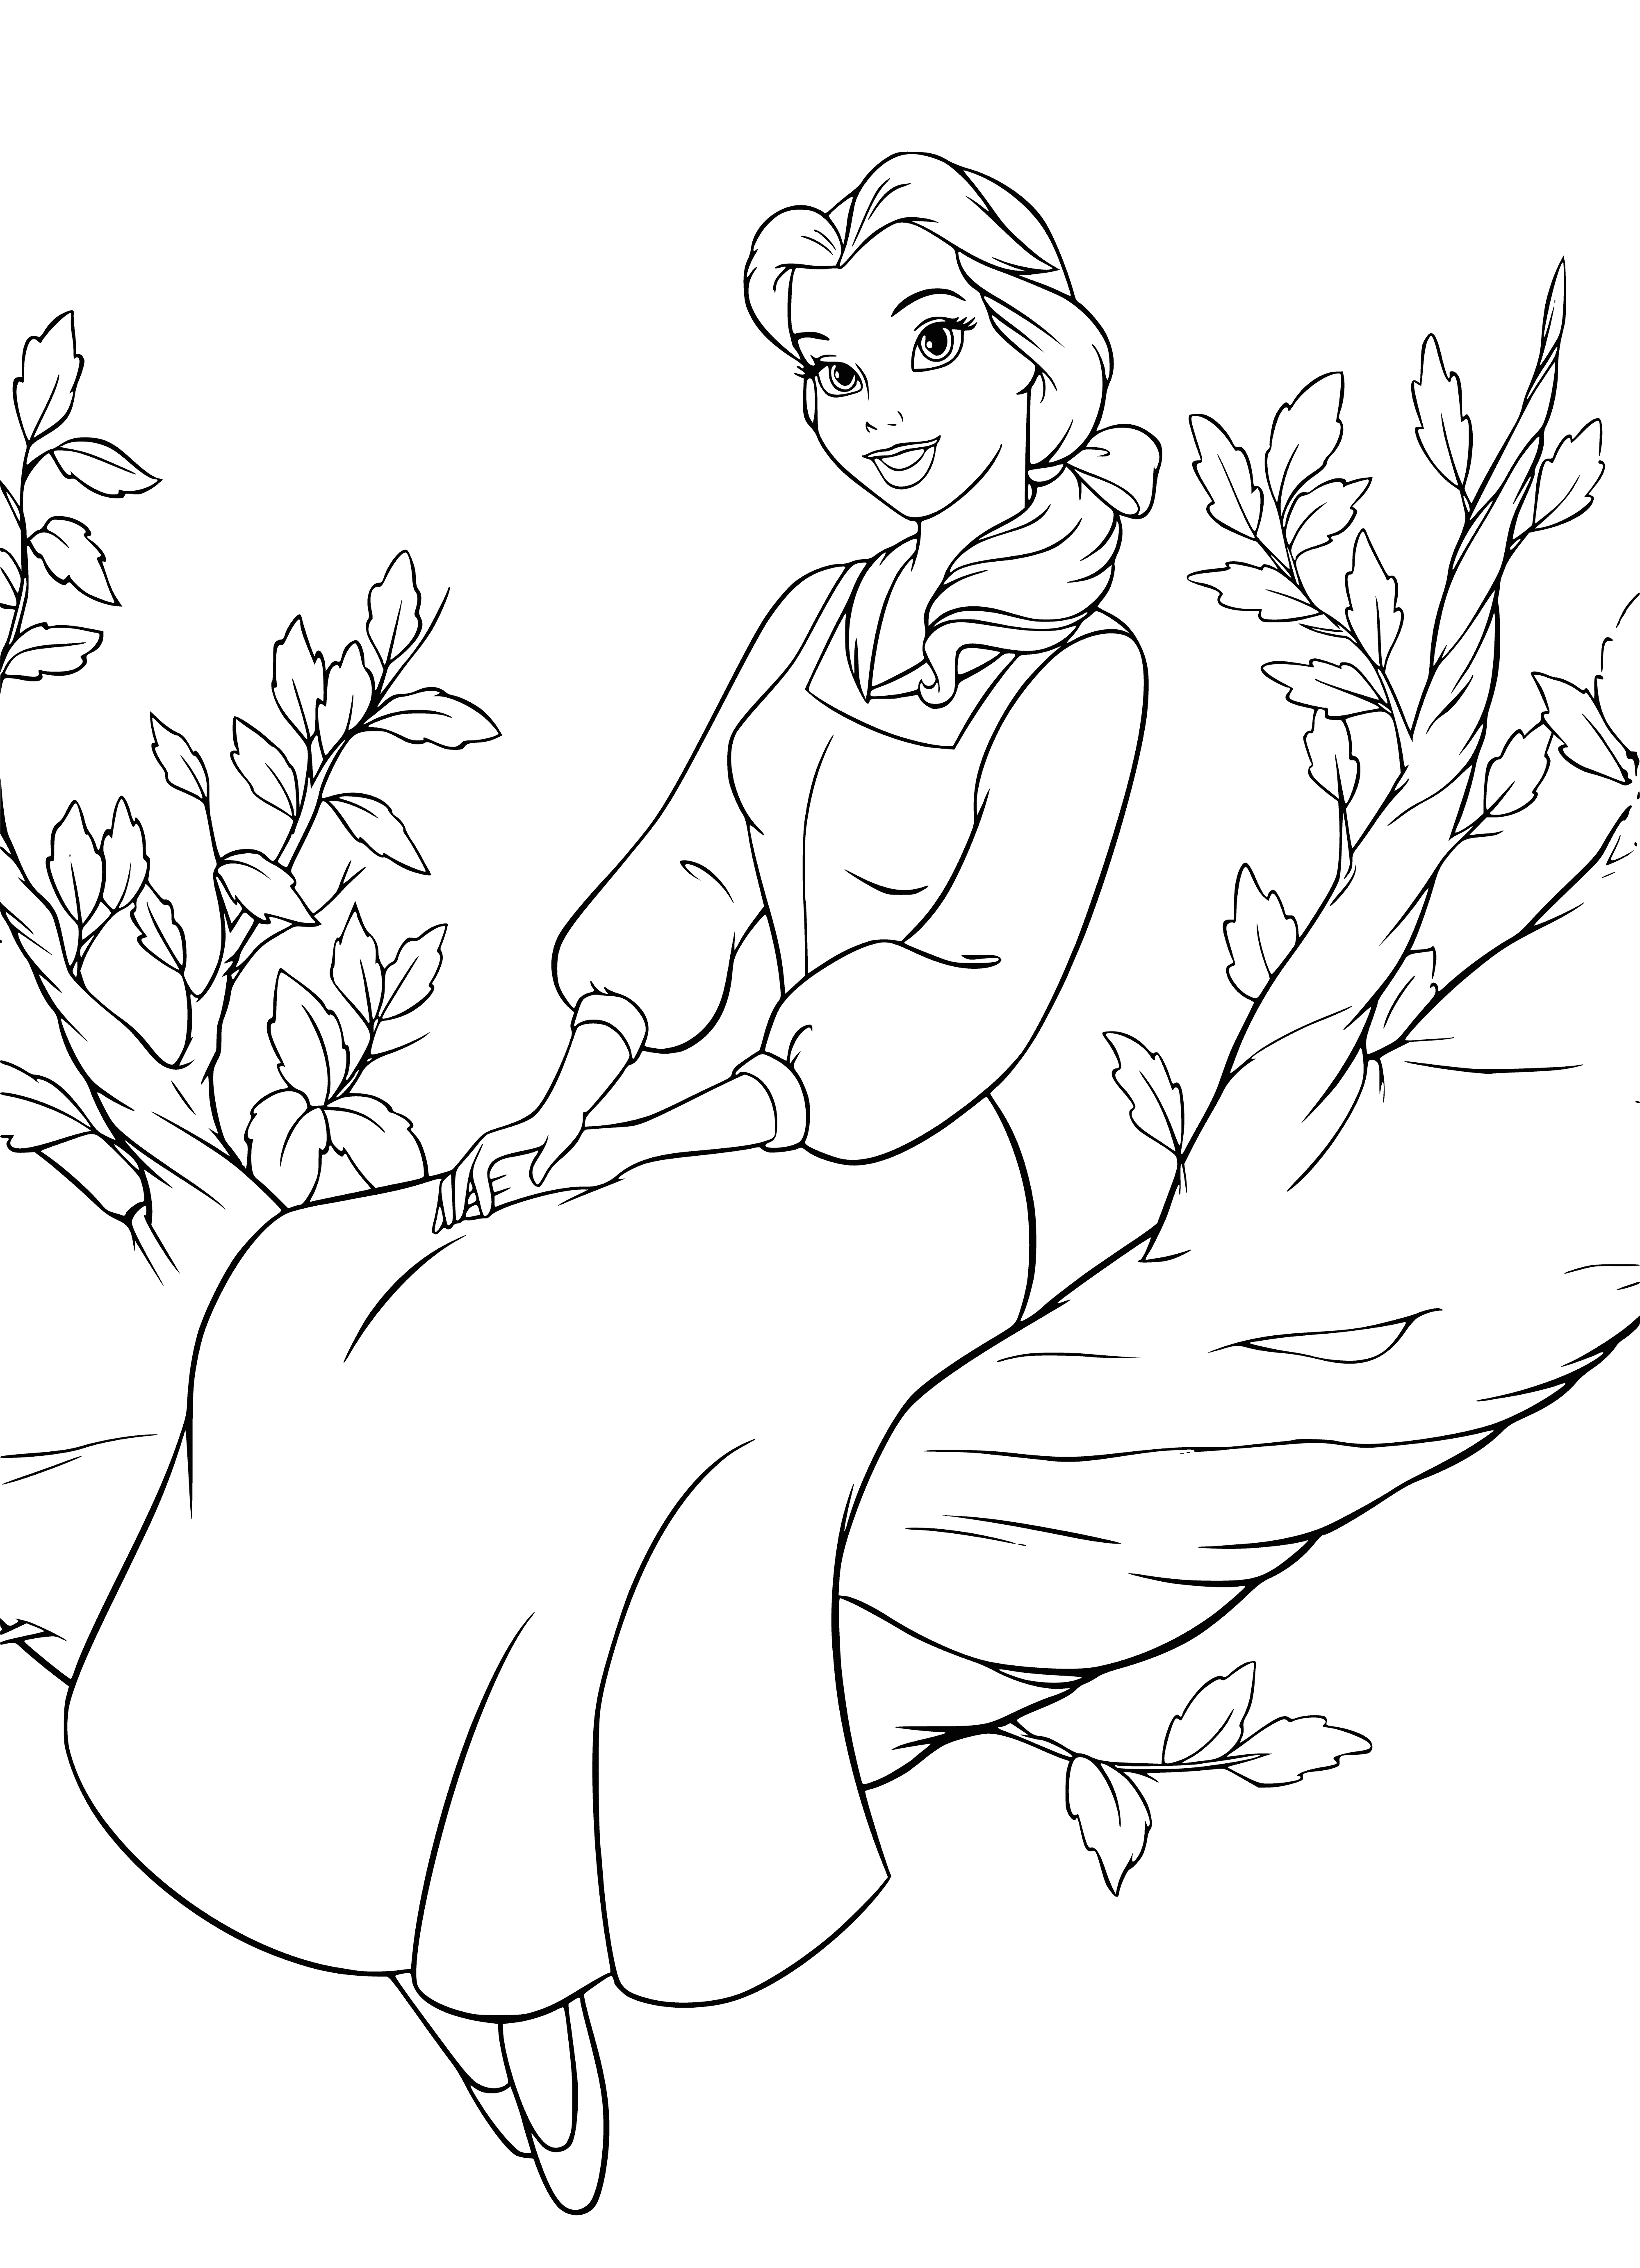 coloring page: Belle reading in the garden wearing a yellow dress, hair in a bun, bird on shoulder. #bemyguest